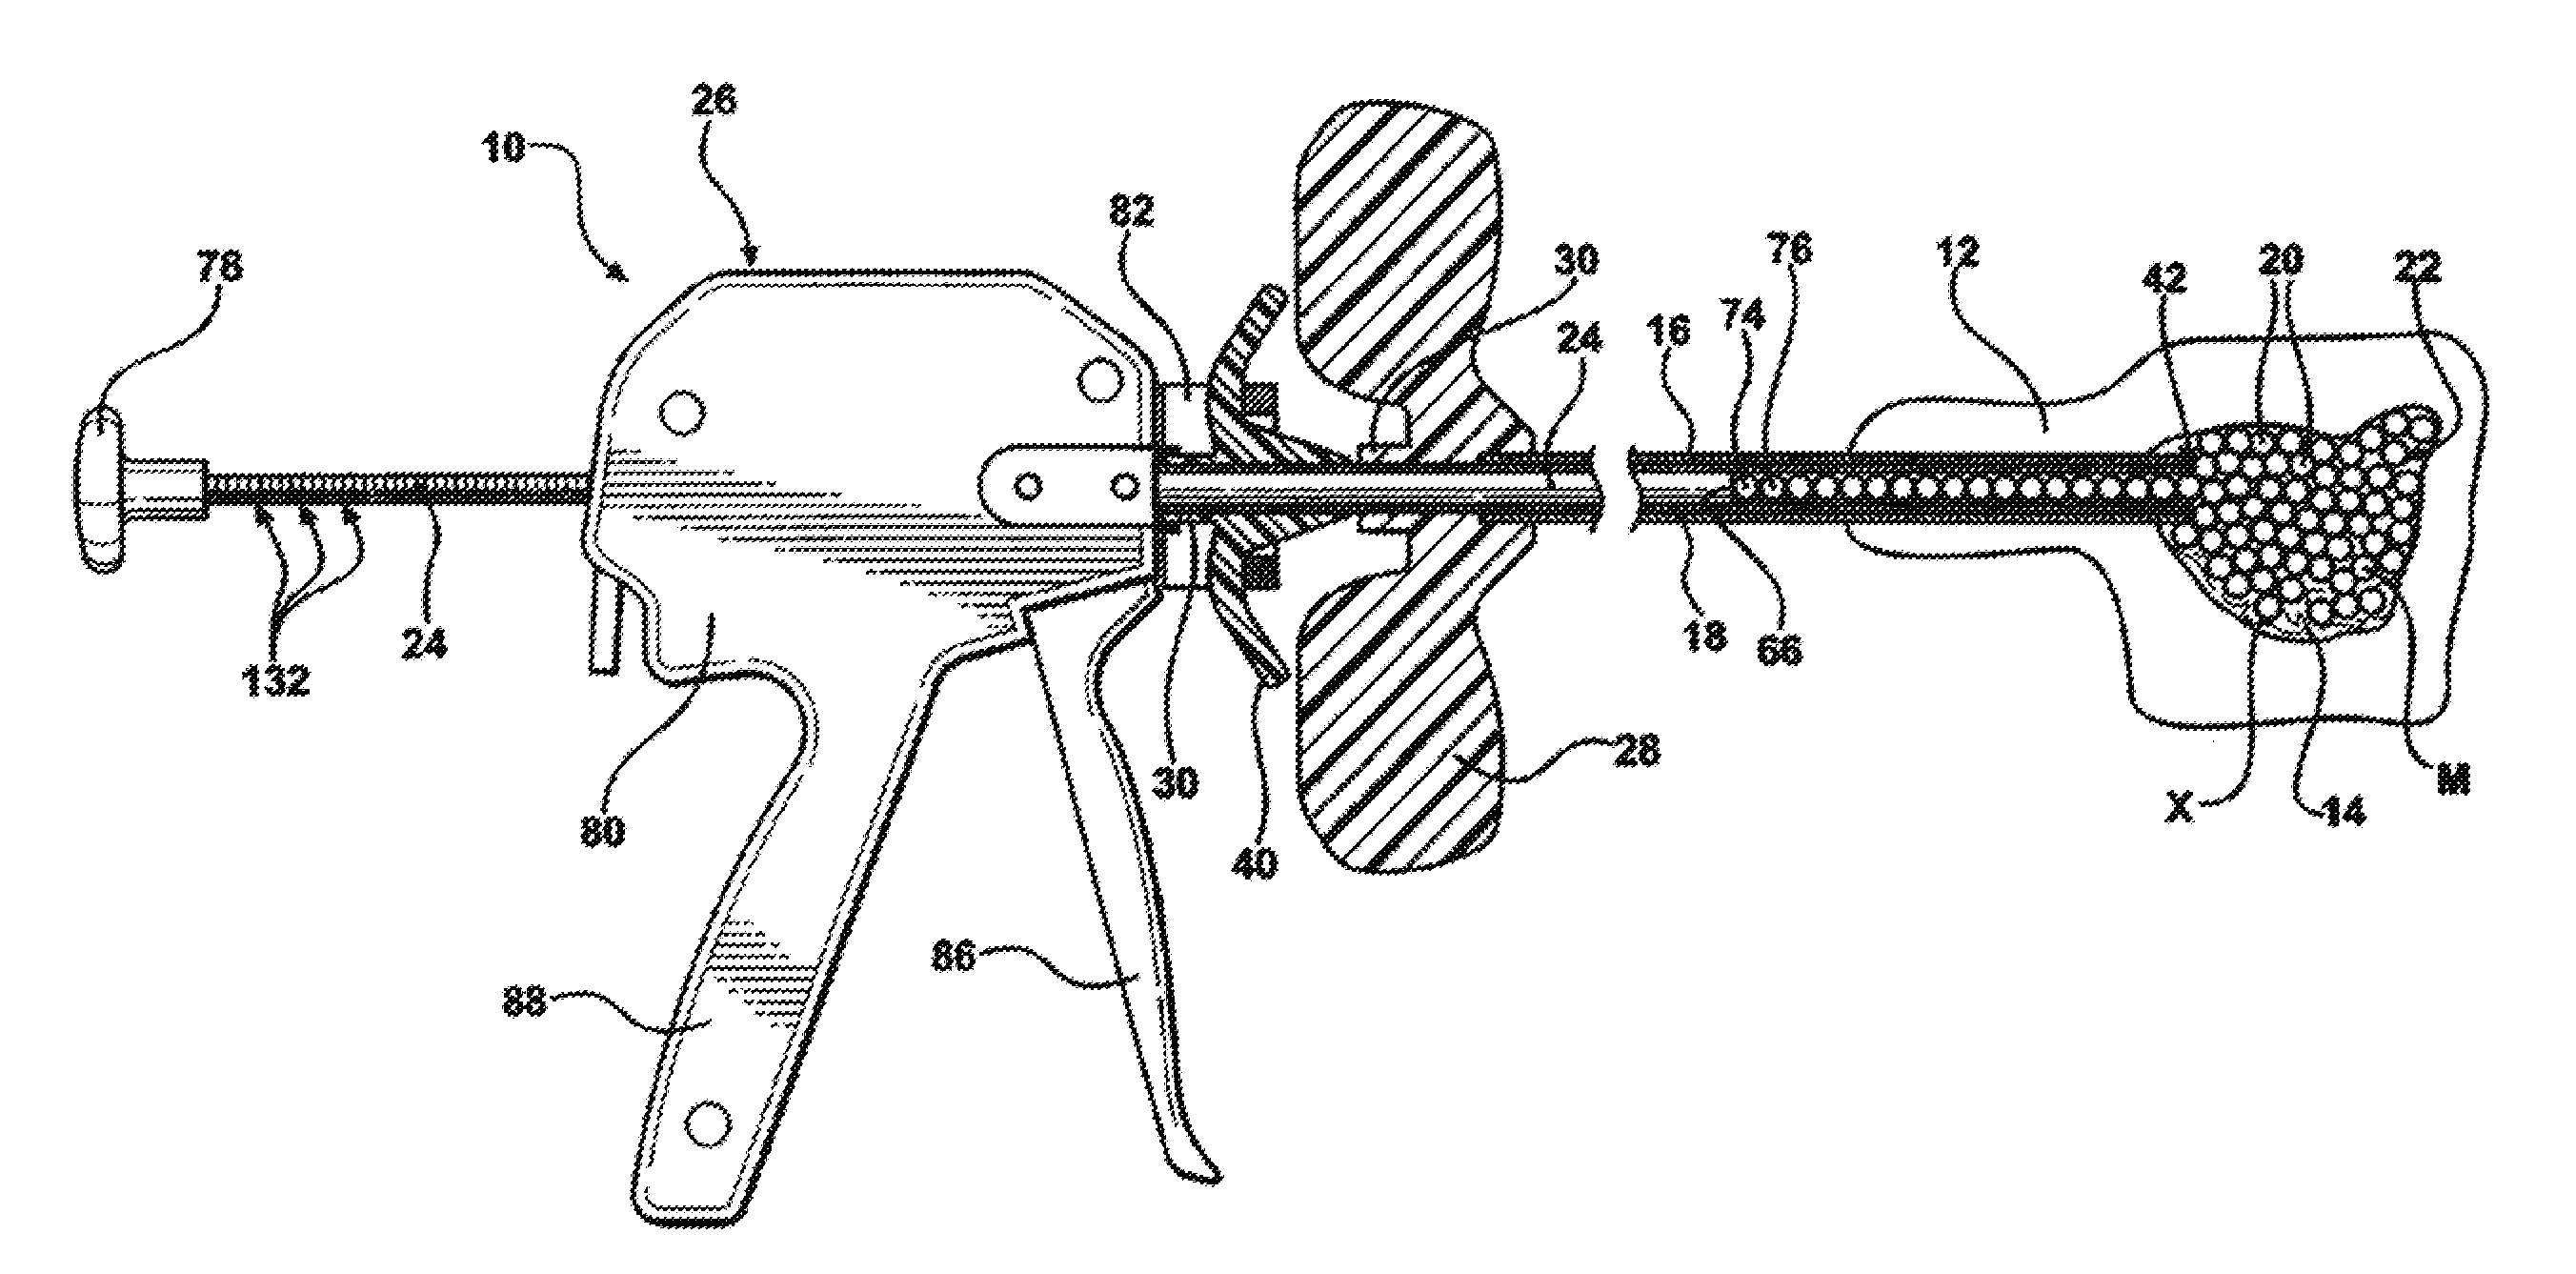 System and method for deliverying an agglomeration of solid beads and cement to the interior of a bone in order to form an implant within the bone